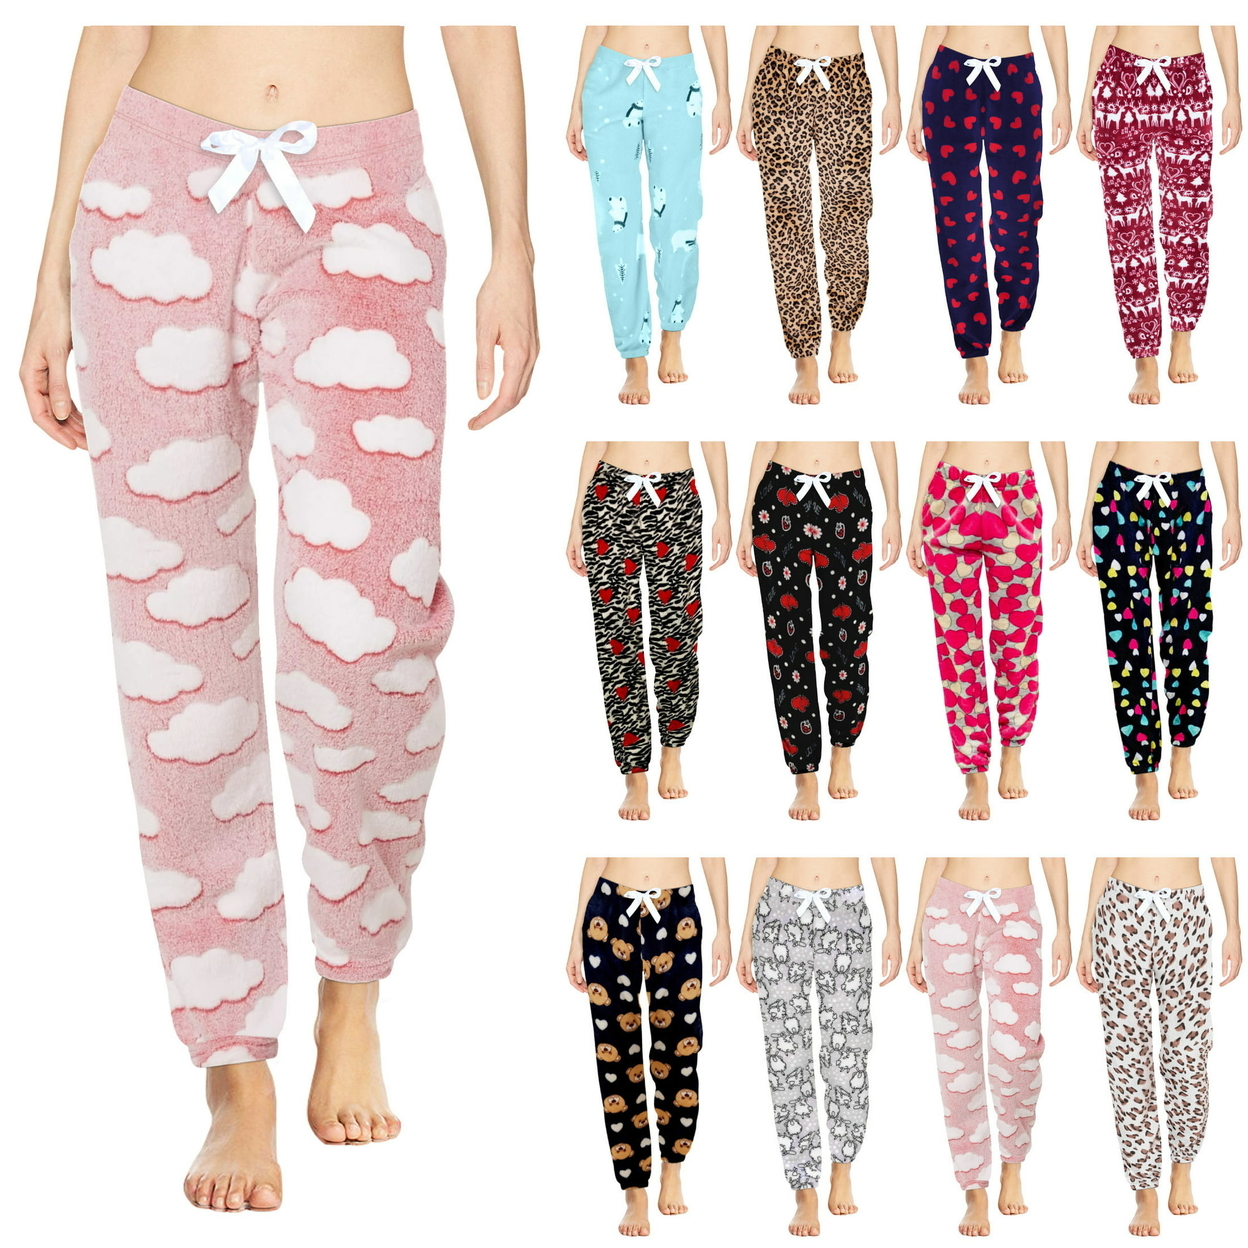 4-Pack: Women's Solid & Printed Ultra-Soft Comfy Stretch Micro-Fleece Pajama Lounge Pants - Large, Shapes